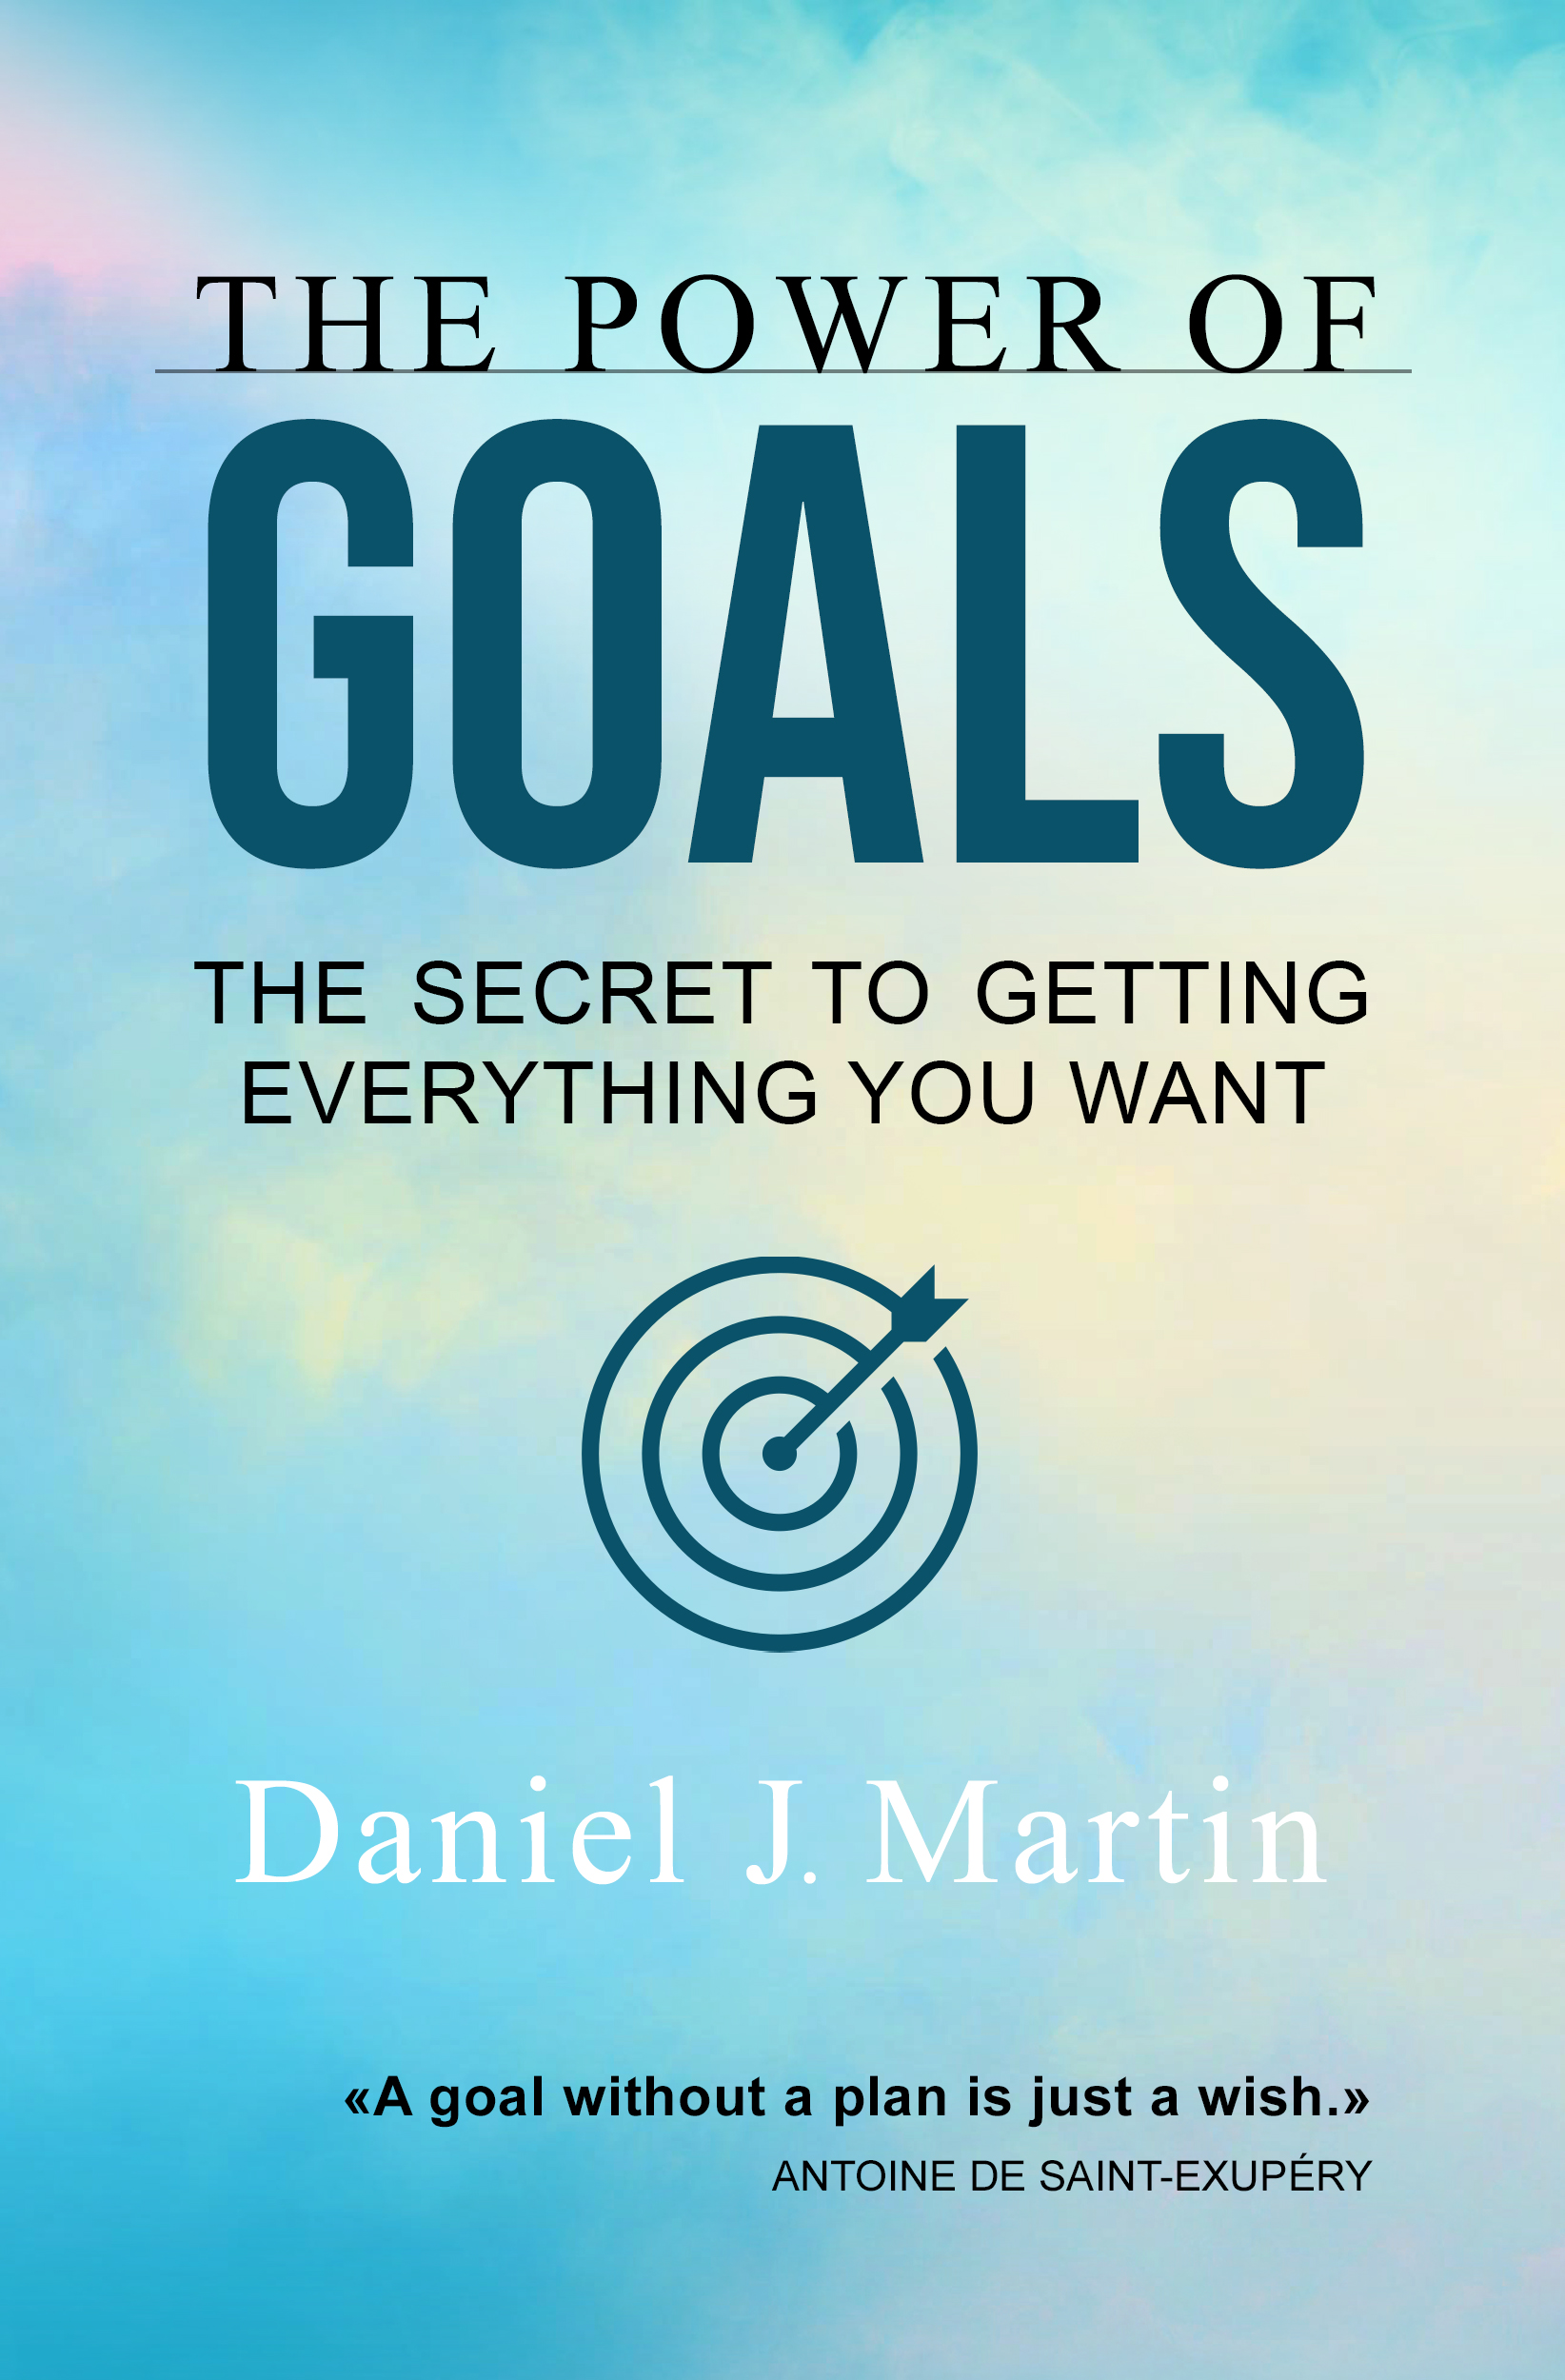 FREE: The Power of Goals by Daniel J. Martin